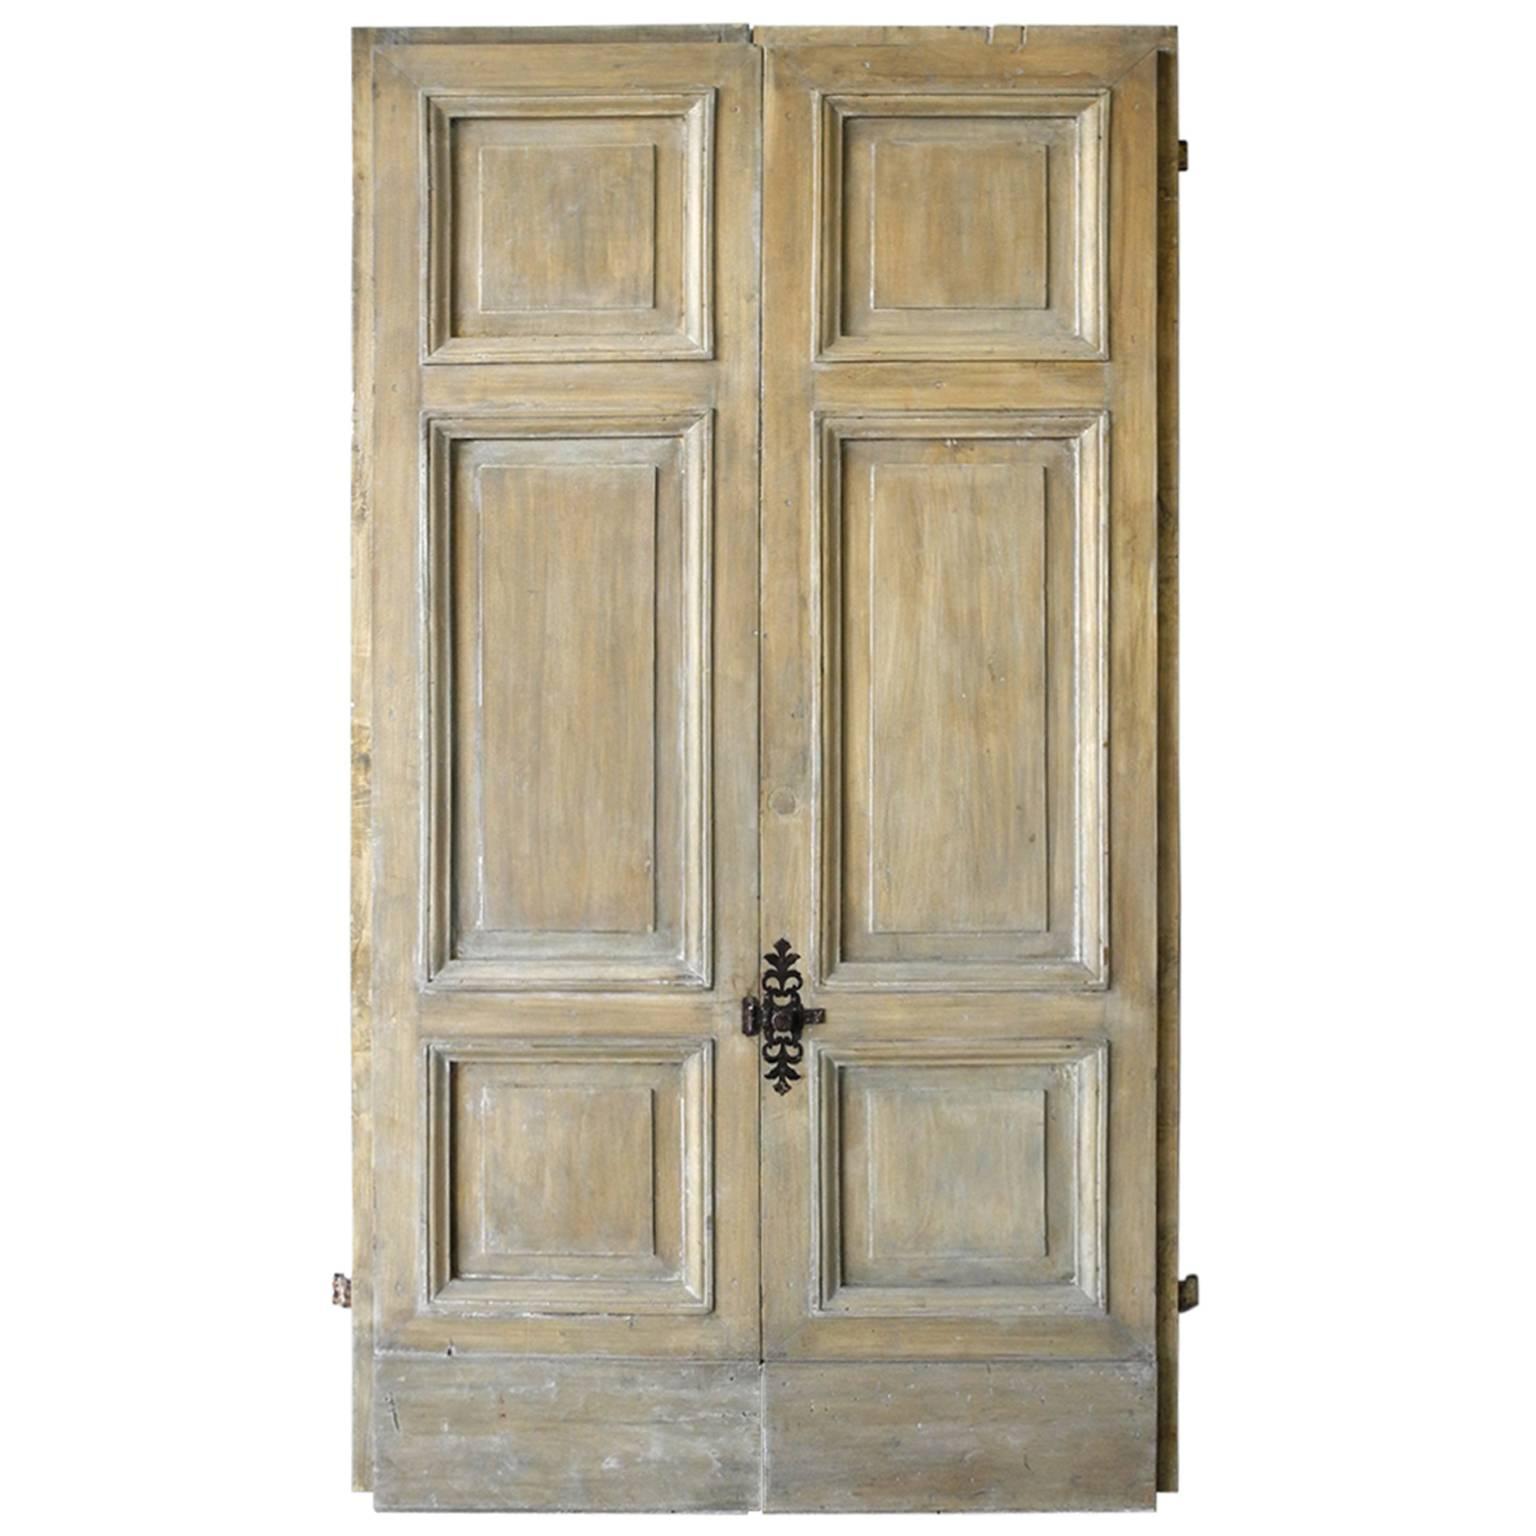 Pair of Antique Italian 18th Century Wooden Doors with Panelling & Iron Hardware For Sale